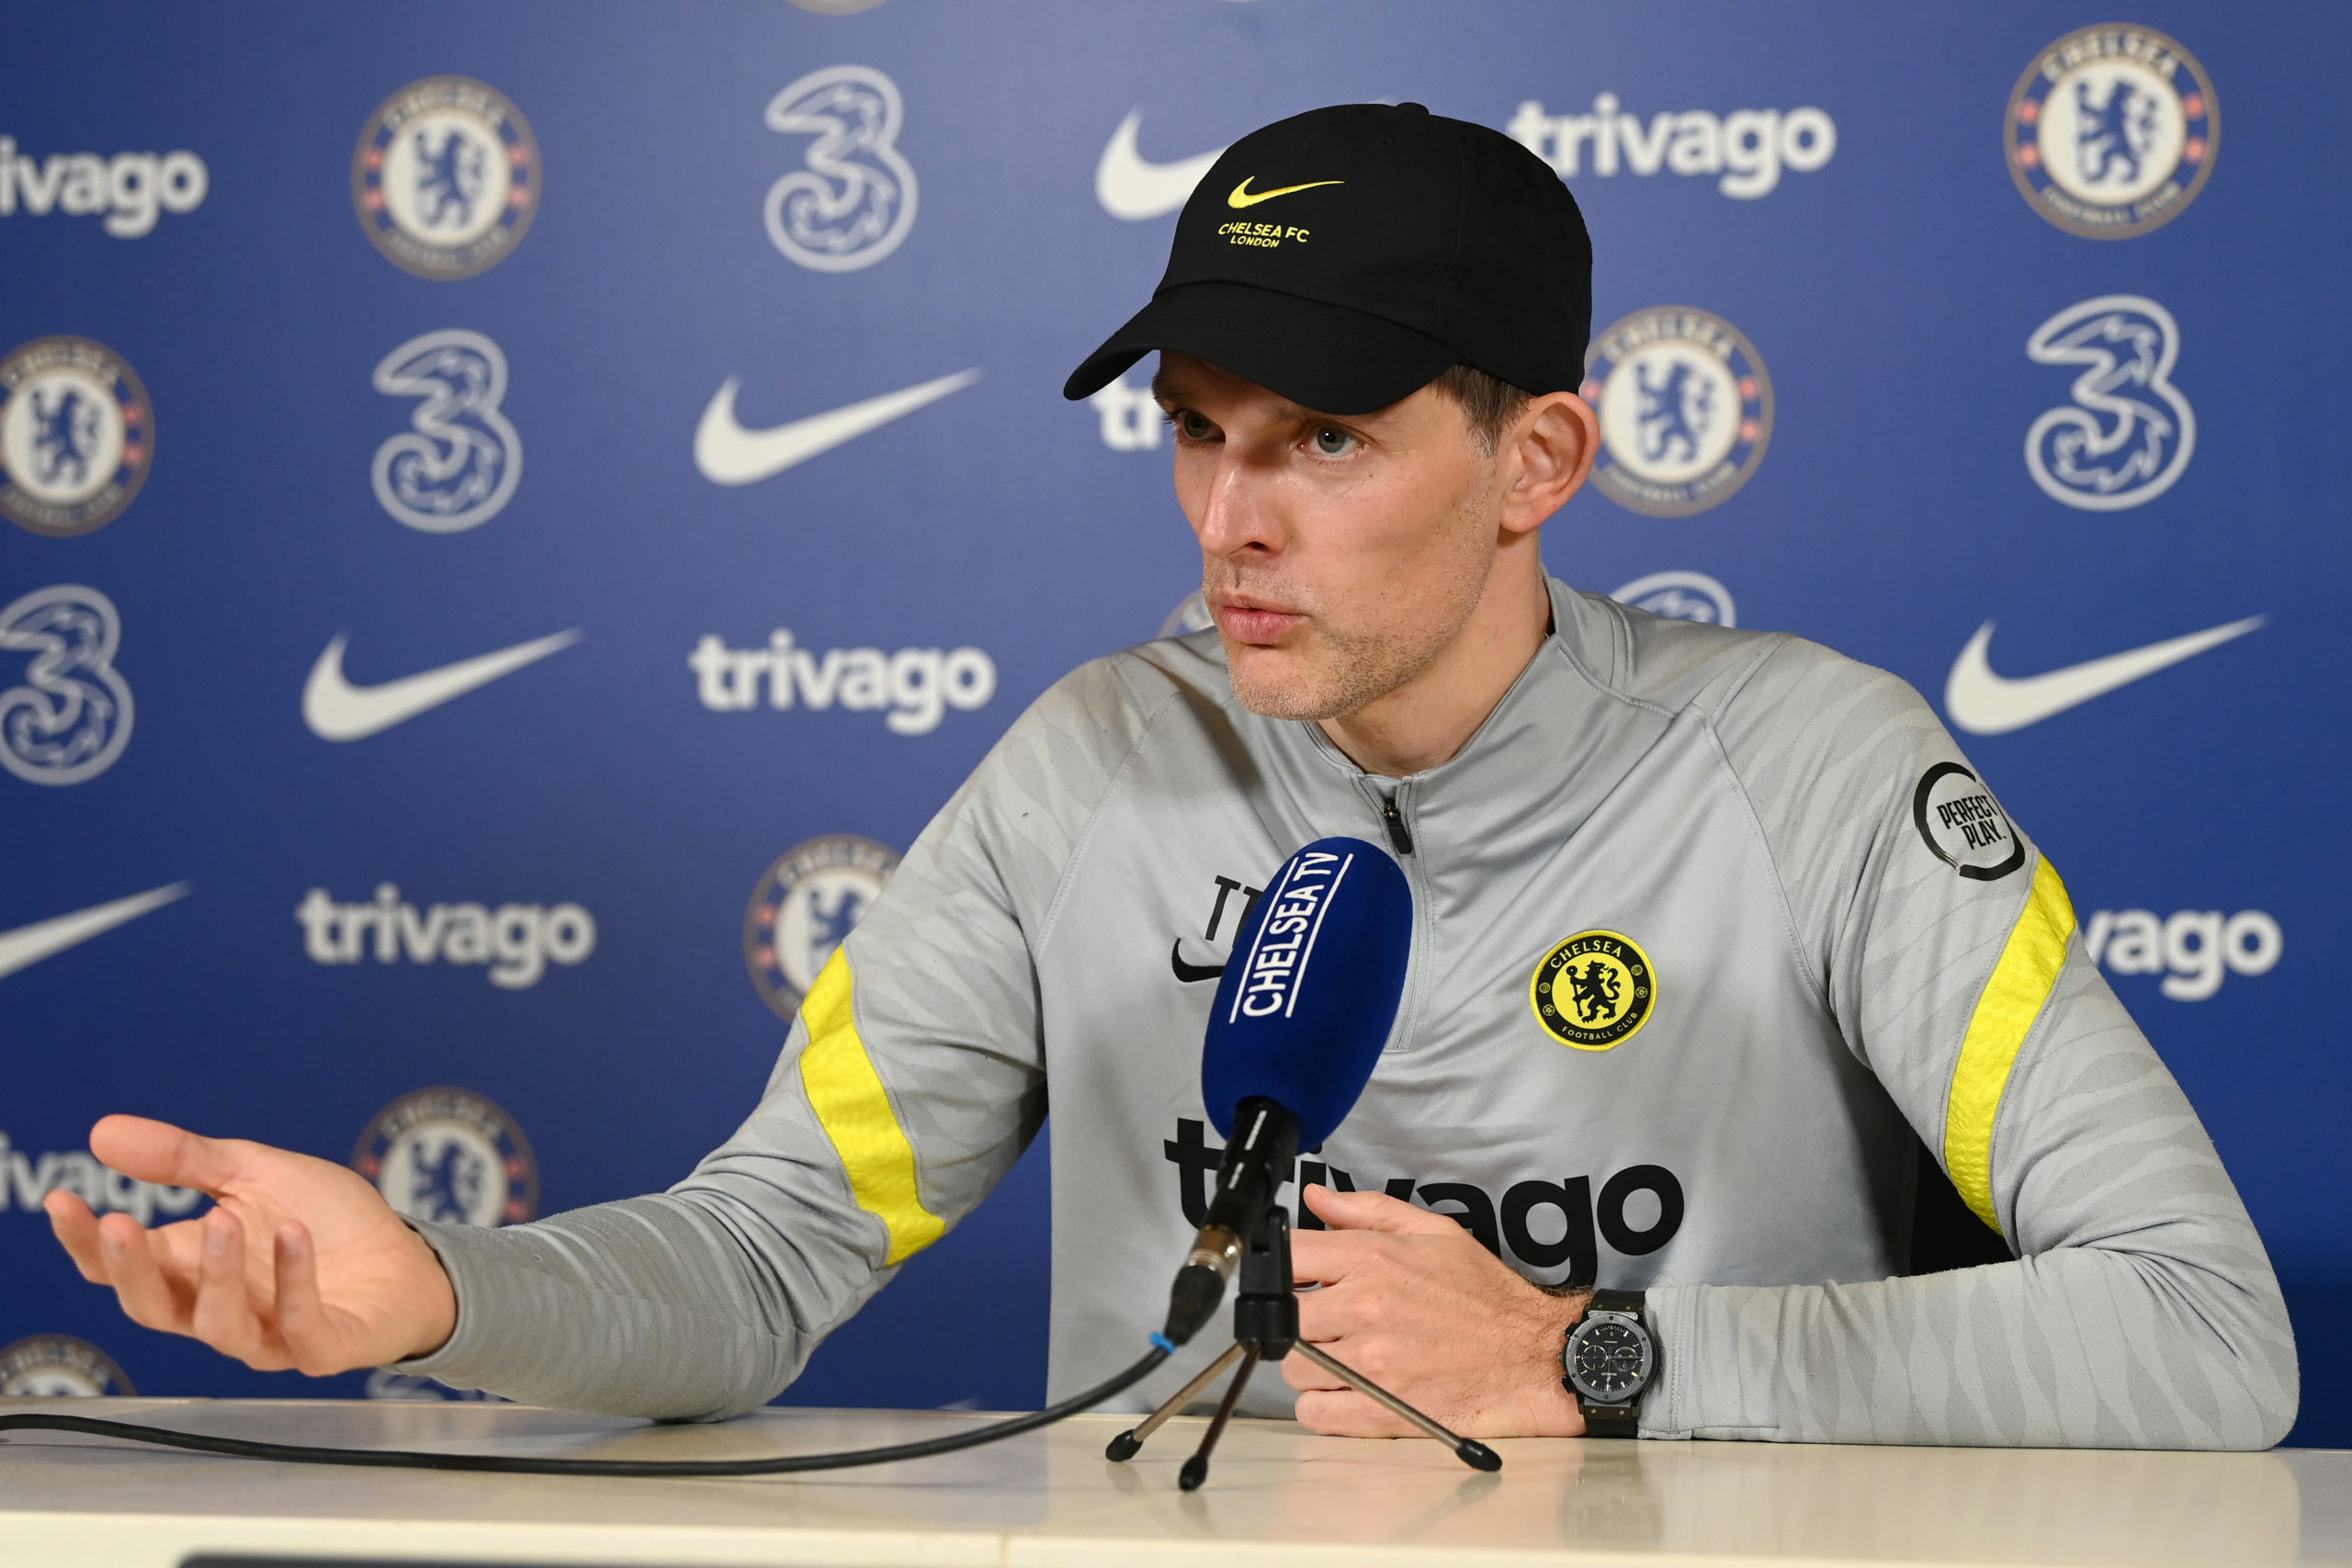 Tuchel says he is happy to have two 'quality' backup players at Chelsea